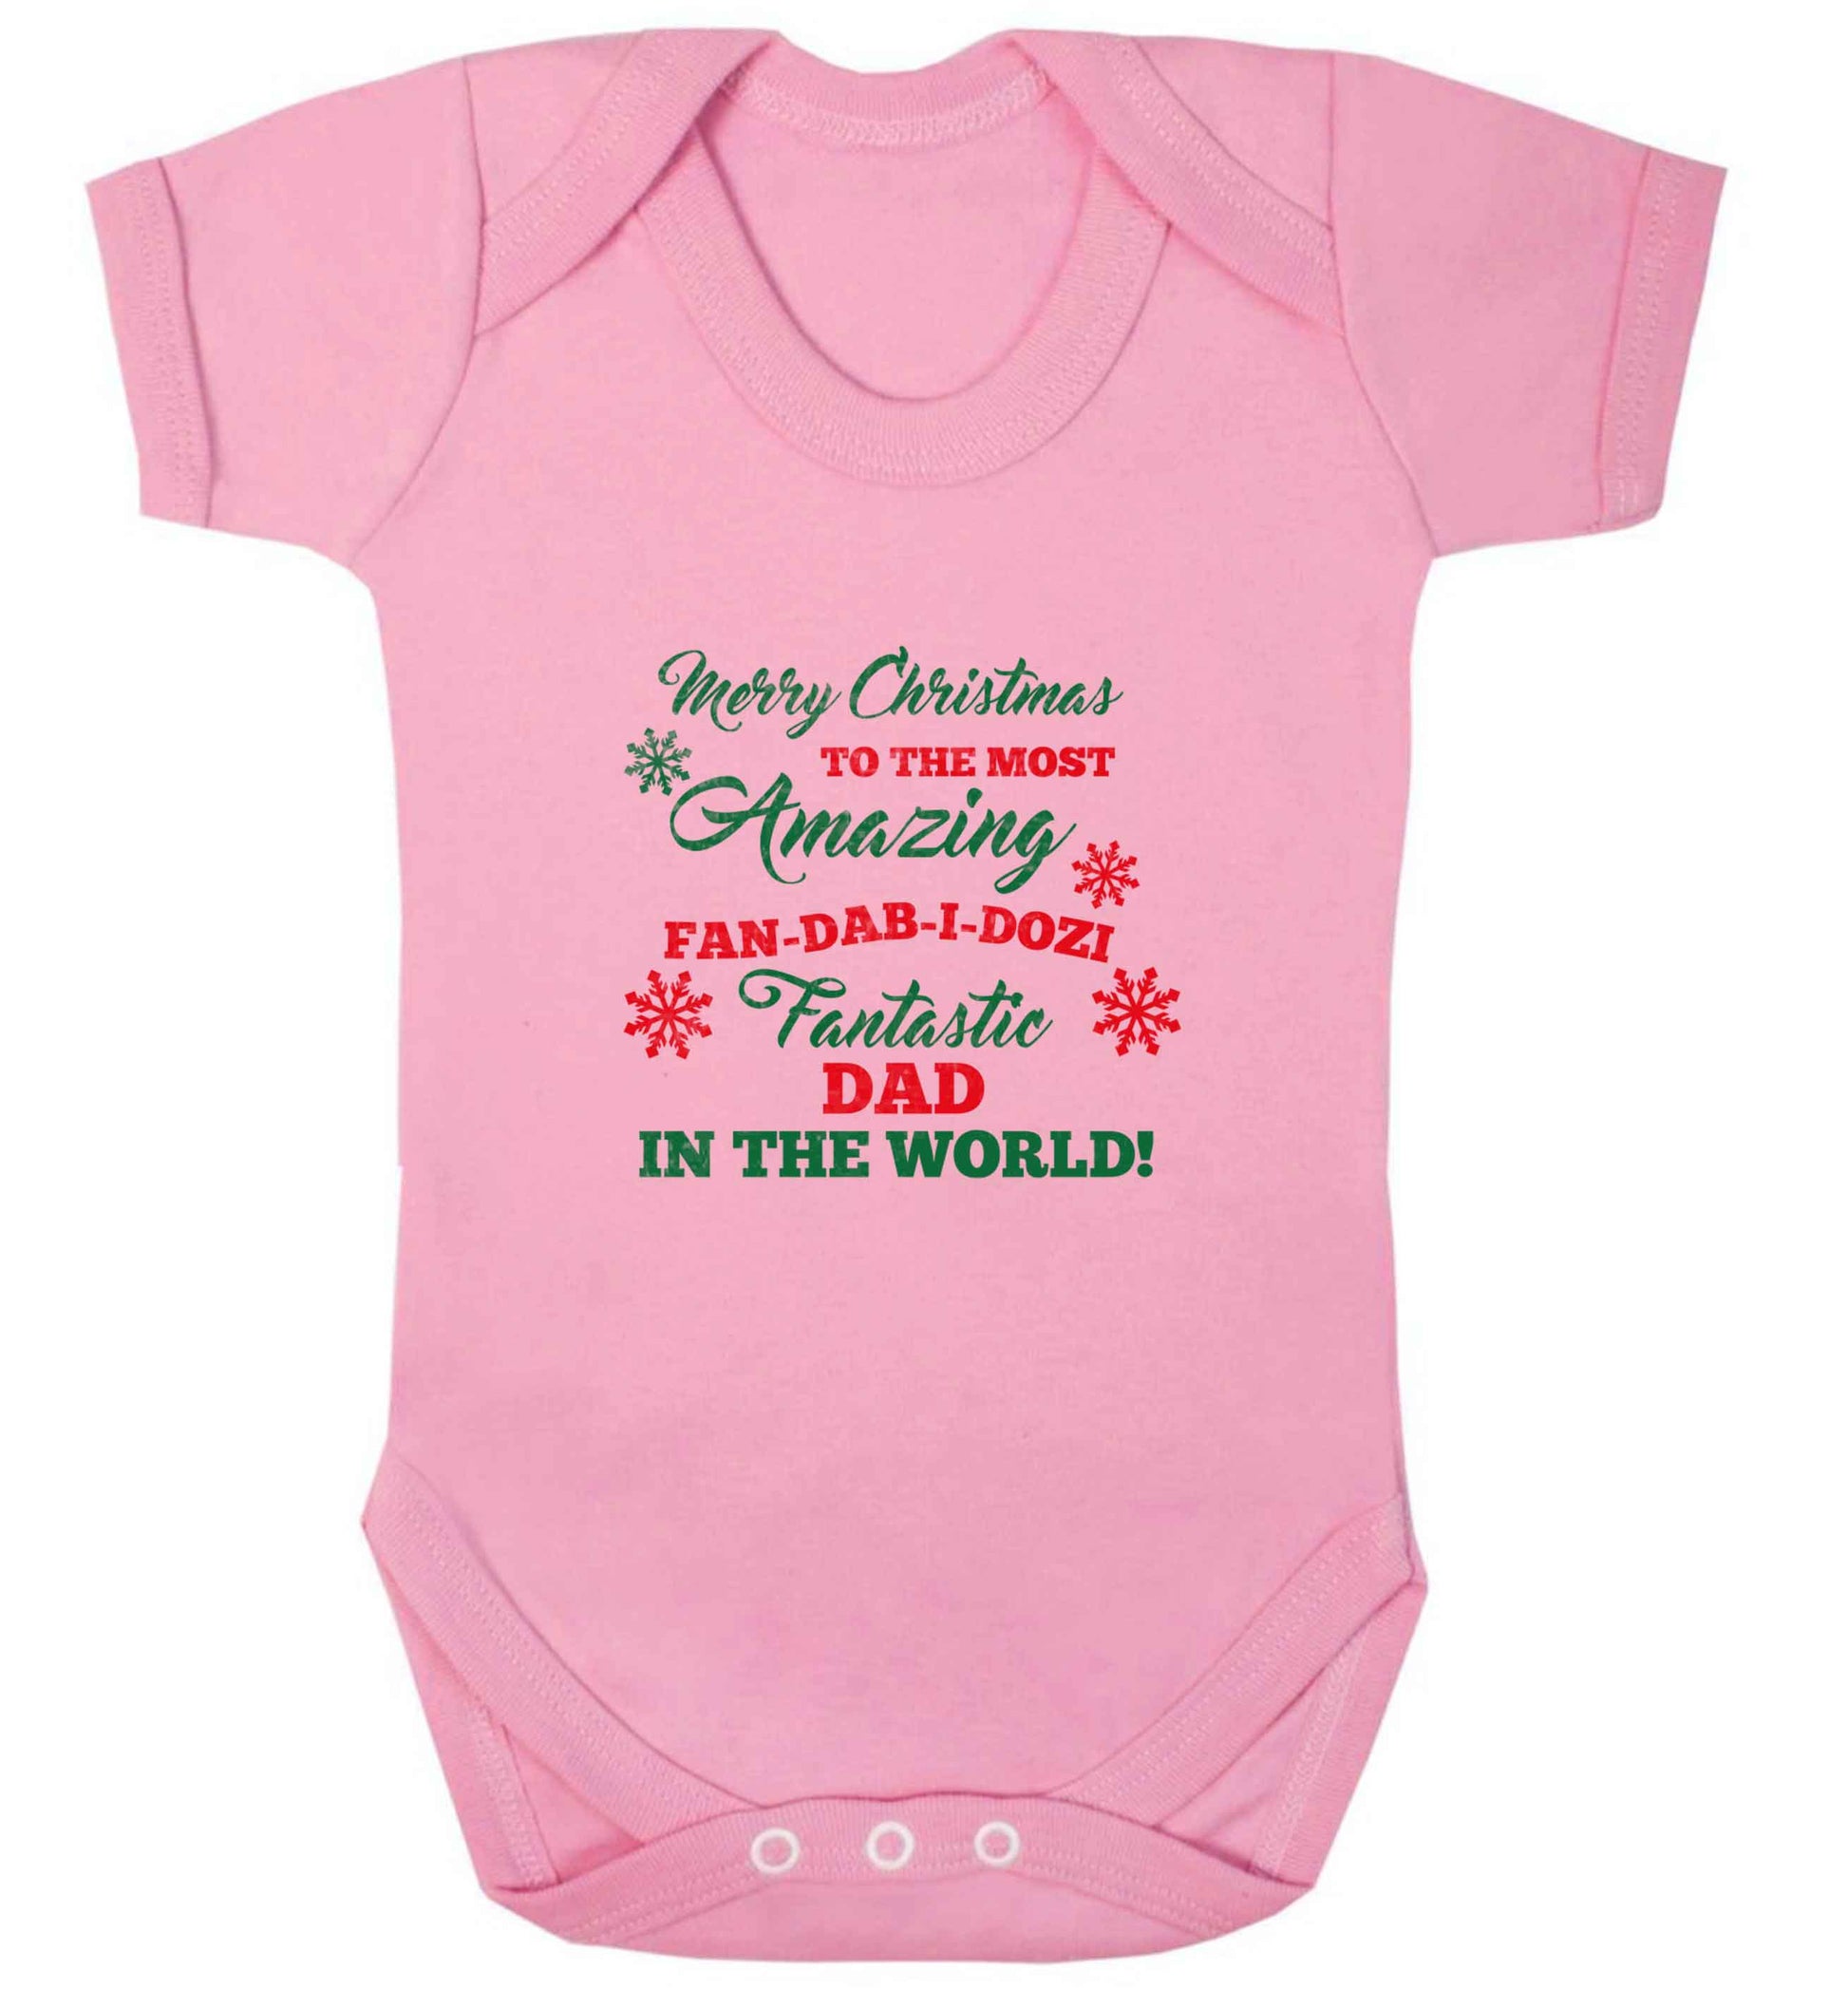 Merry Christmas to the most amazing fan-dab-i-dozi fantasic Dad in the world baby vest pale pink 18-24 months